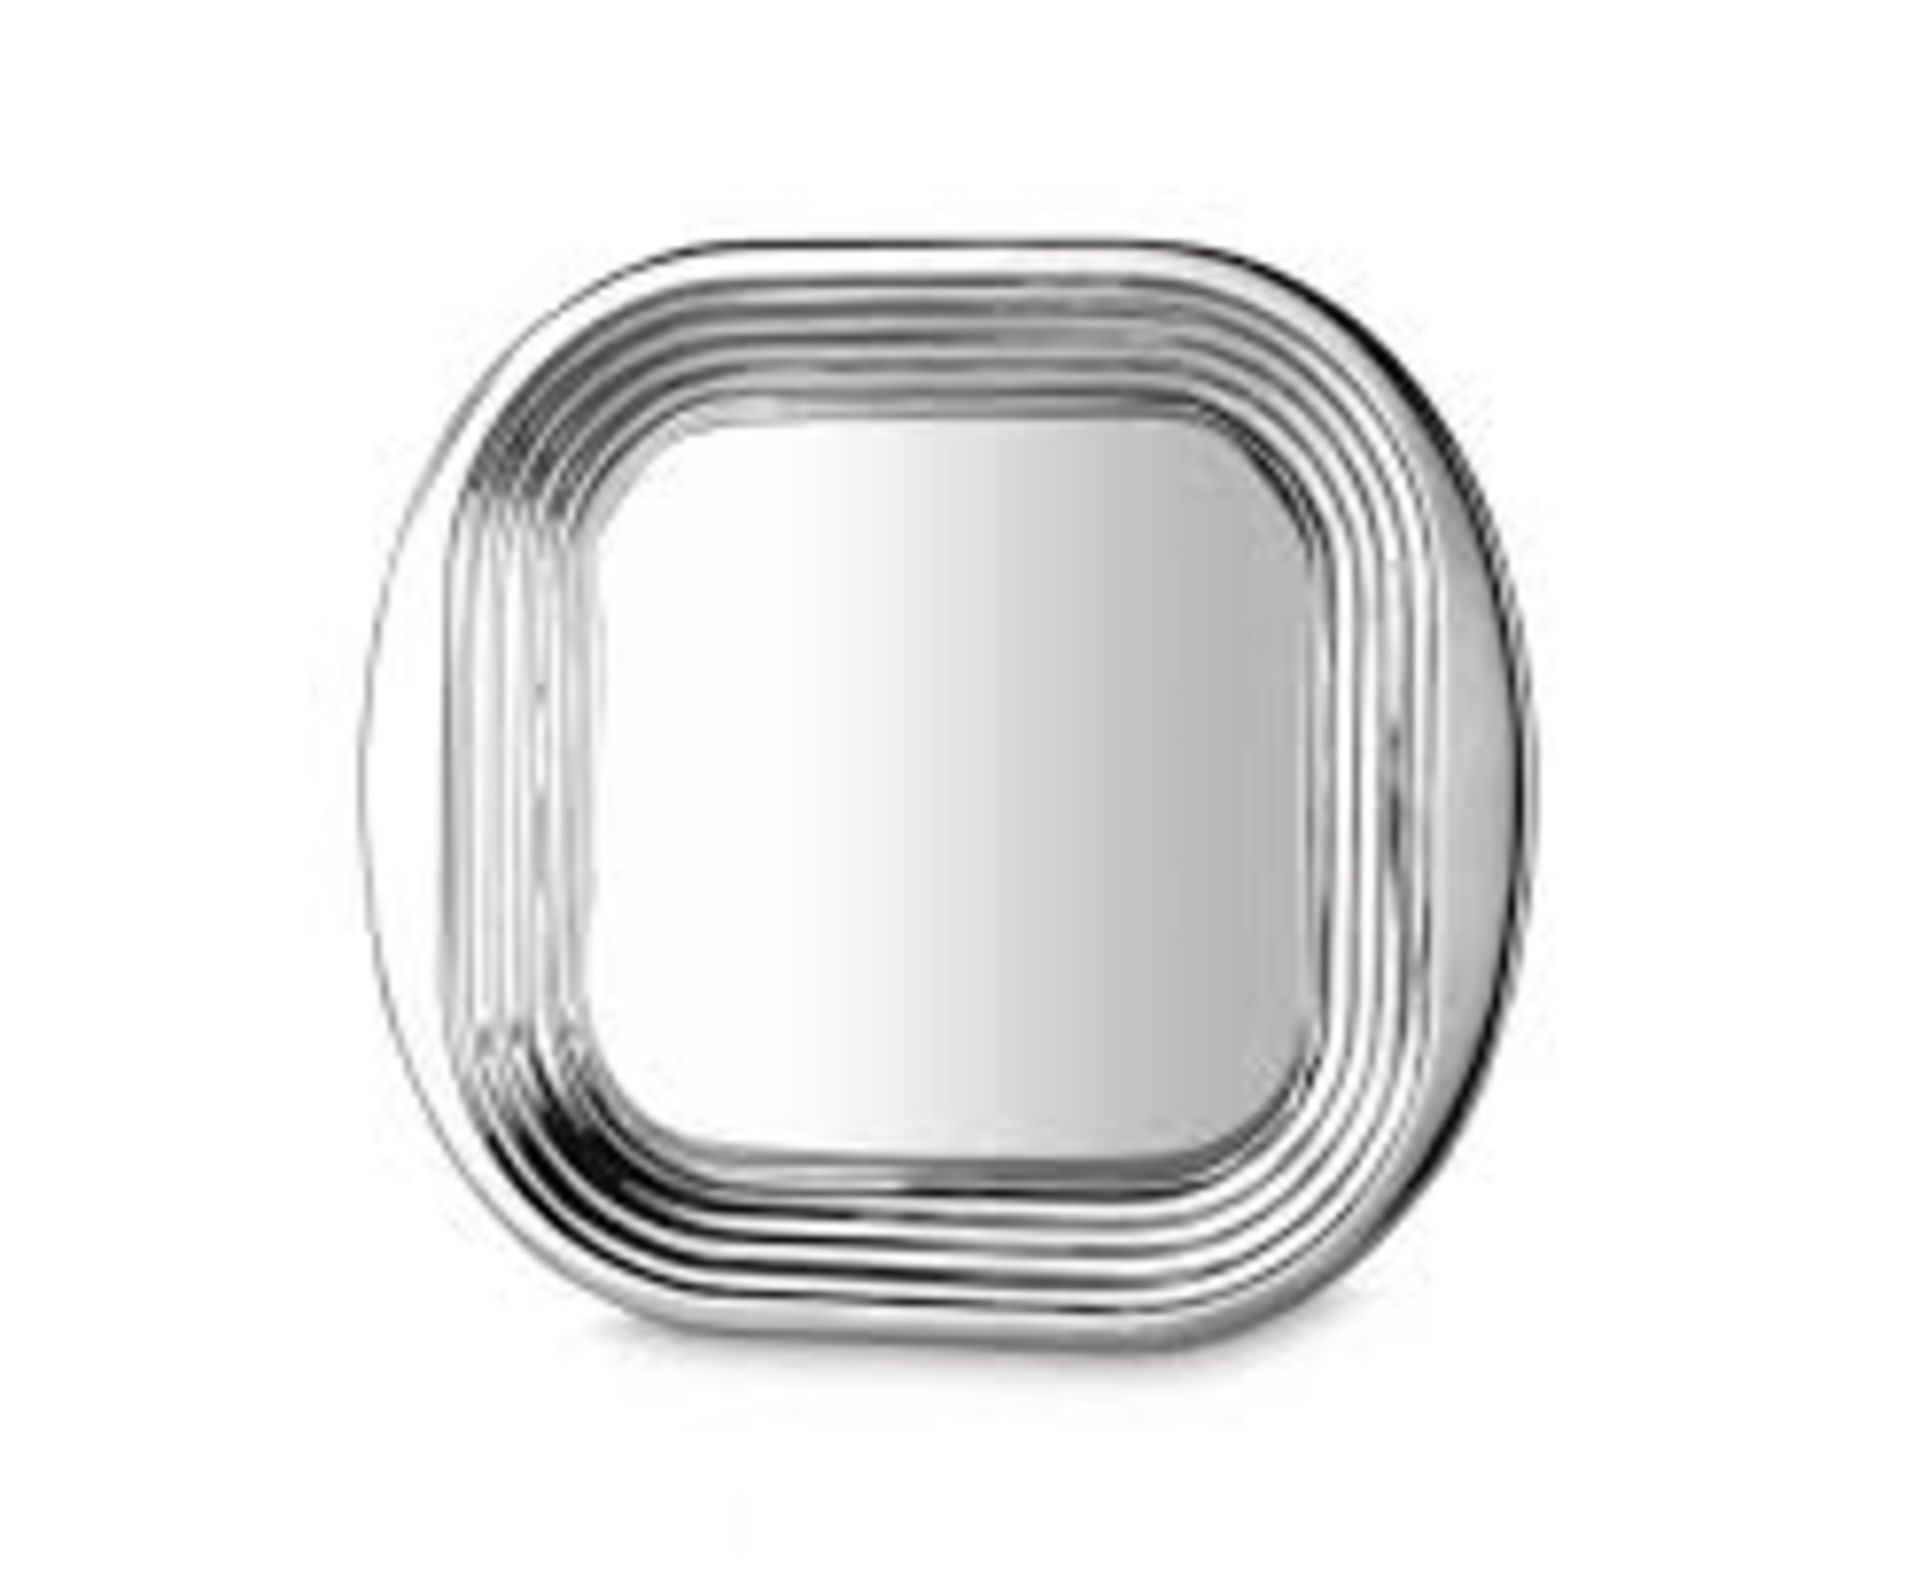 Boxed Tom Dixon Form Stainless Steel Serving Tray RRP £80 (4141302) (Public Viewing and Appraisals